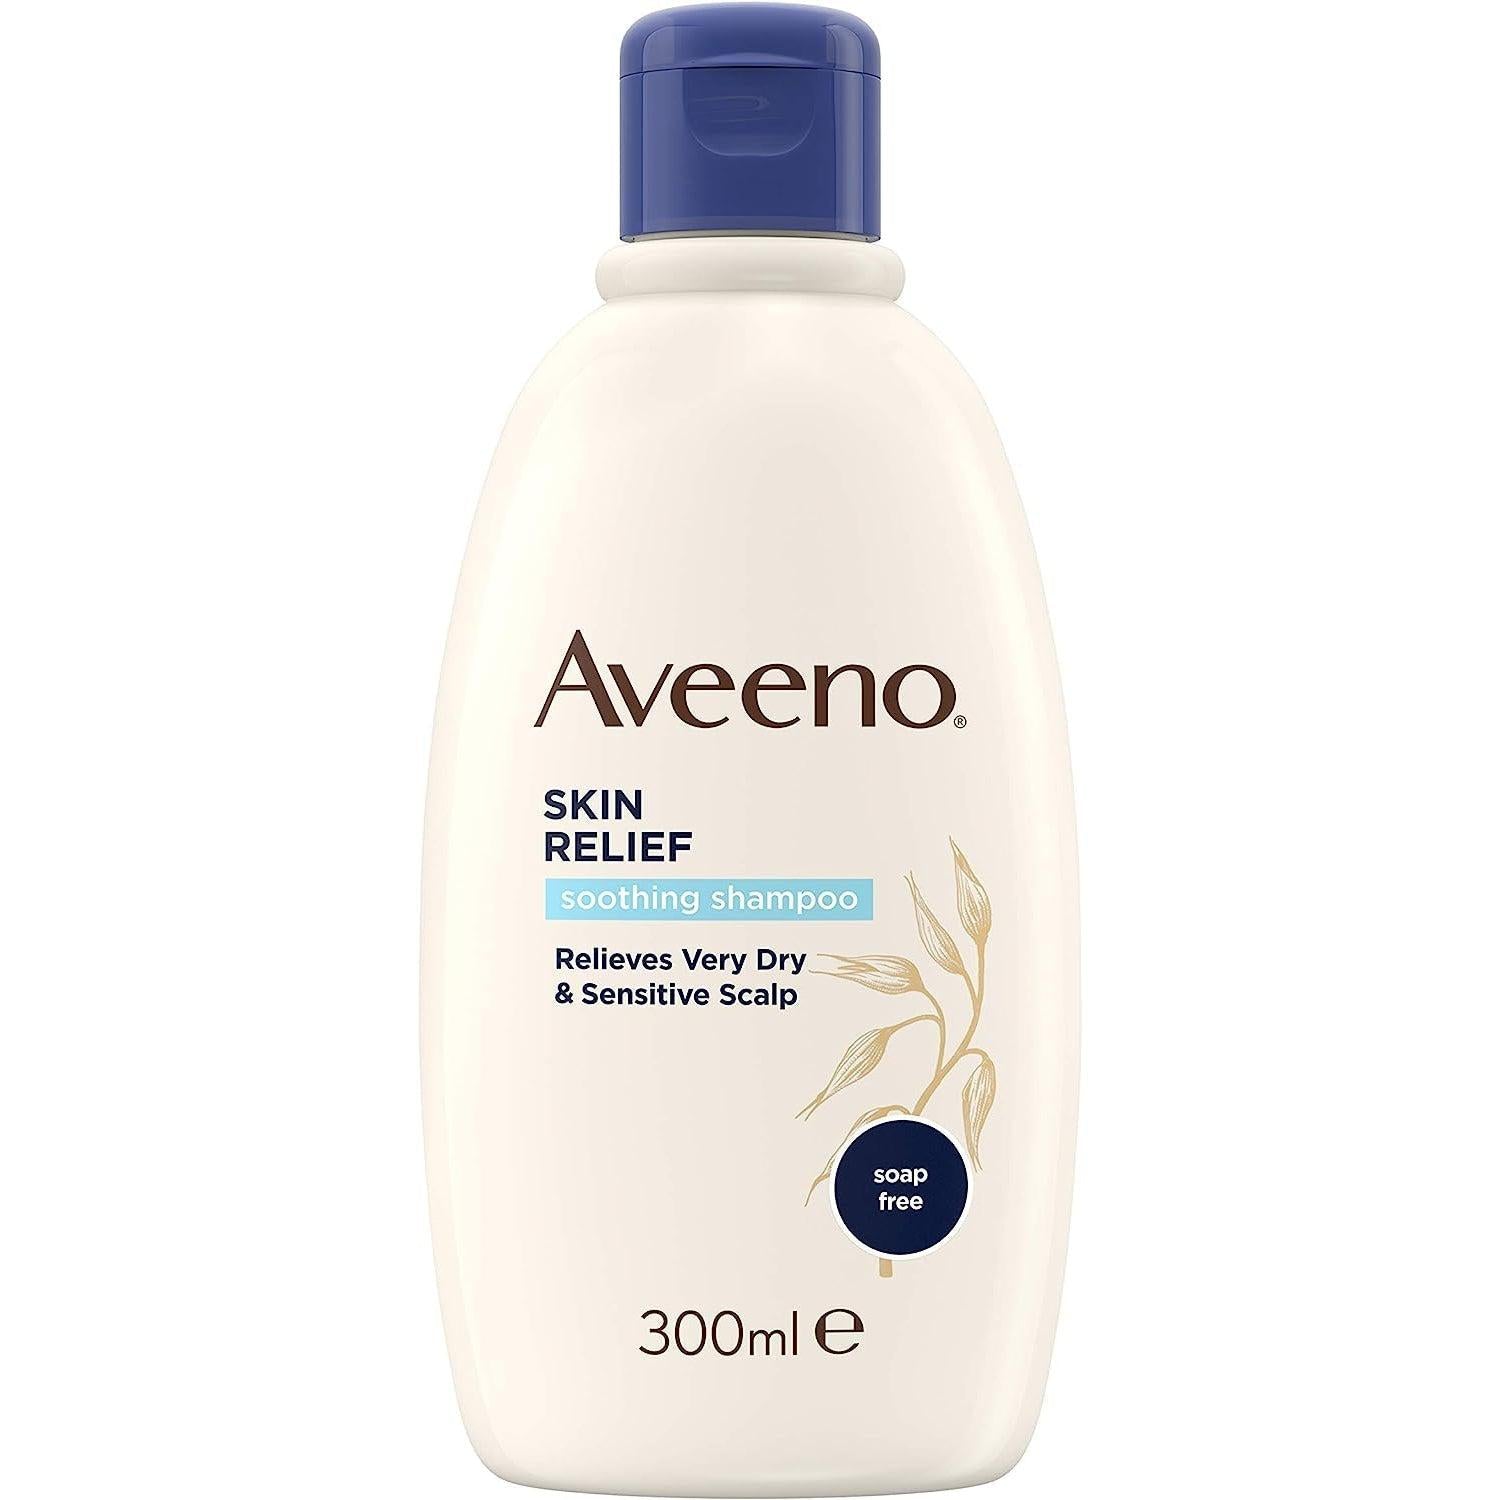 Aveeno Skin Relief Soothing Shampoo | Relieves Very Dry & Sensitive Scalp 300ml - Healthxpress.ie